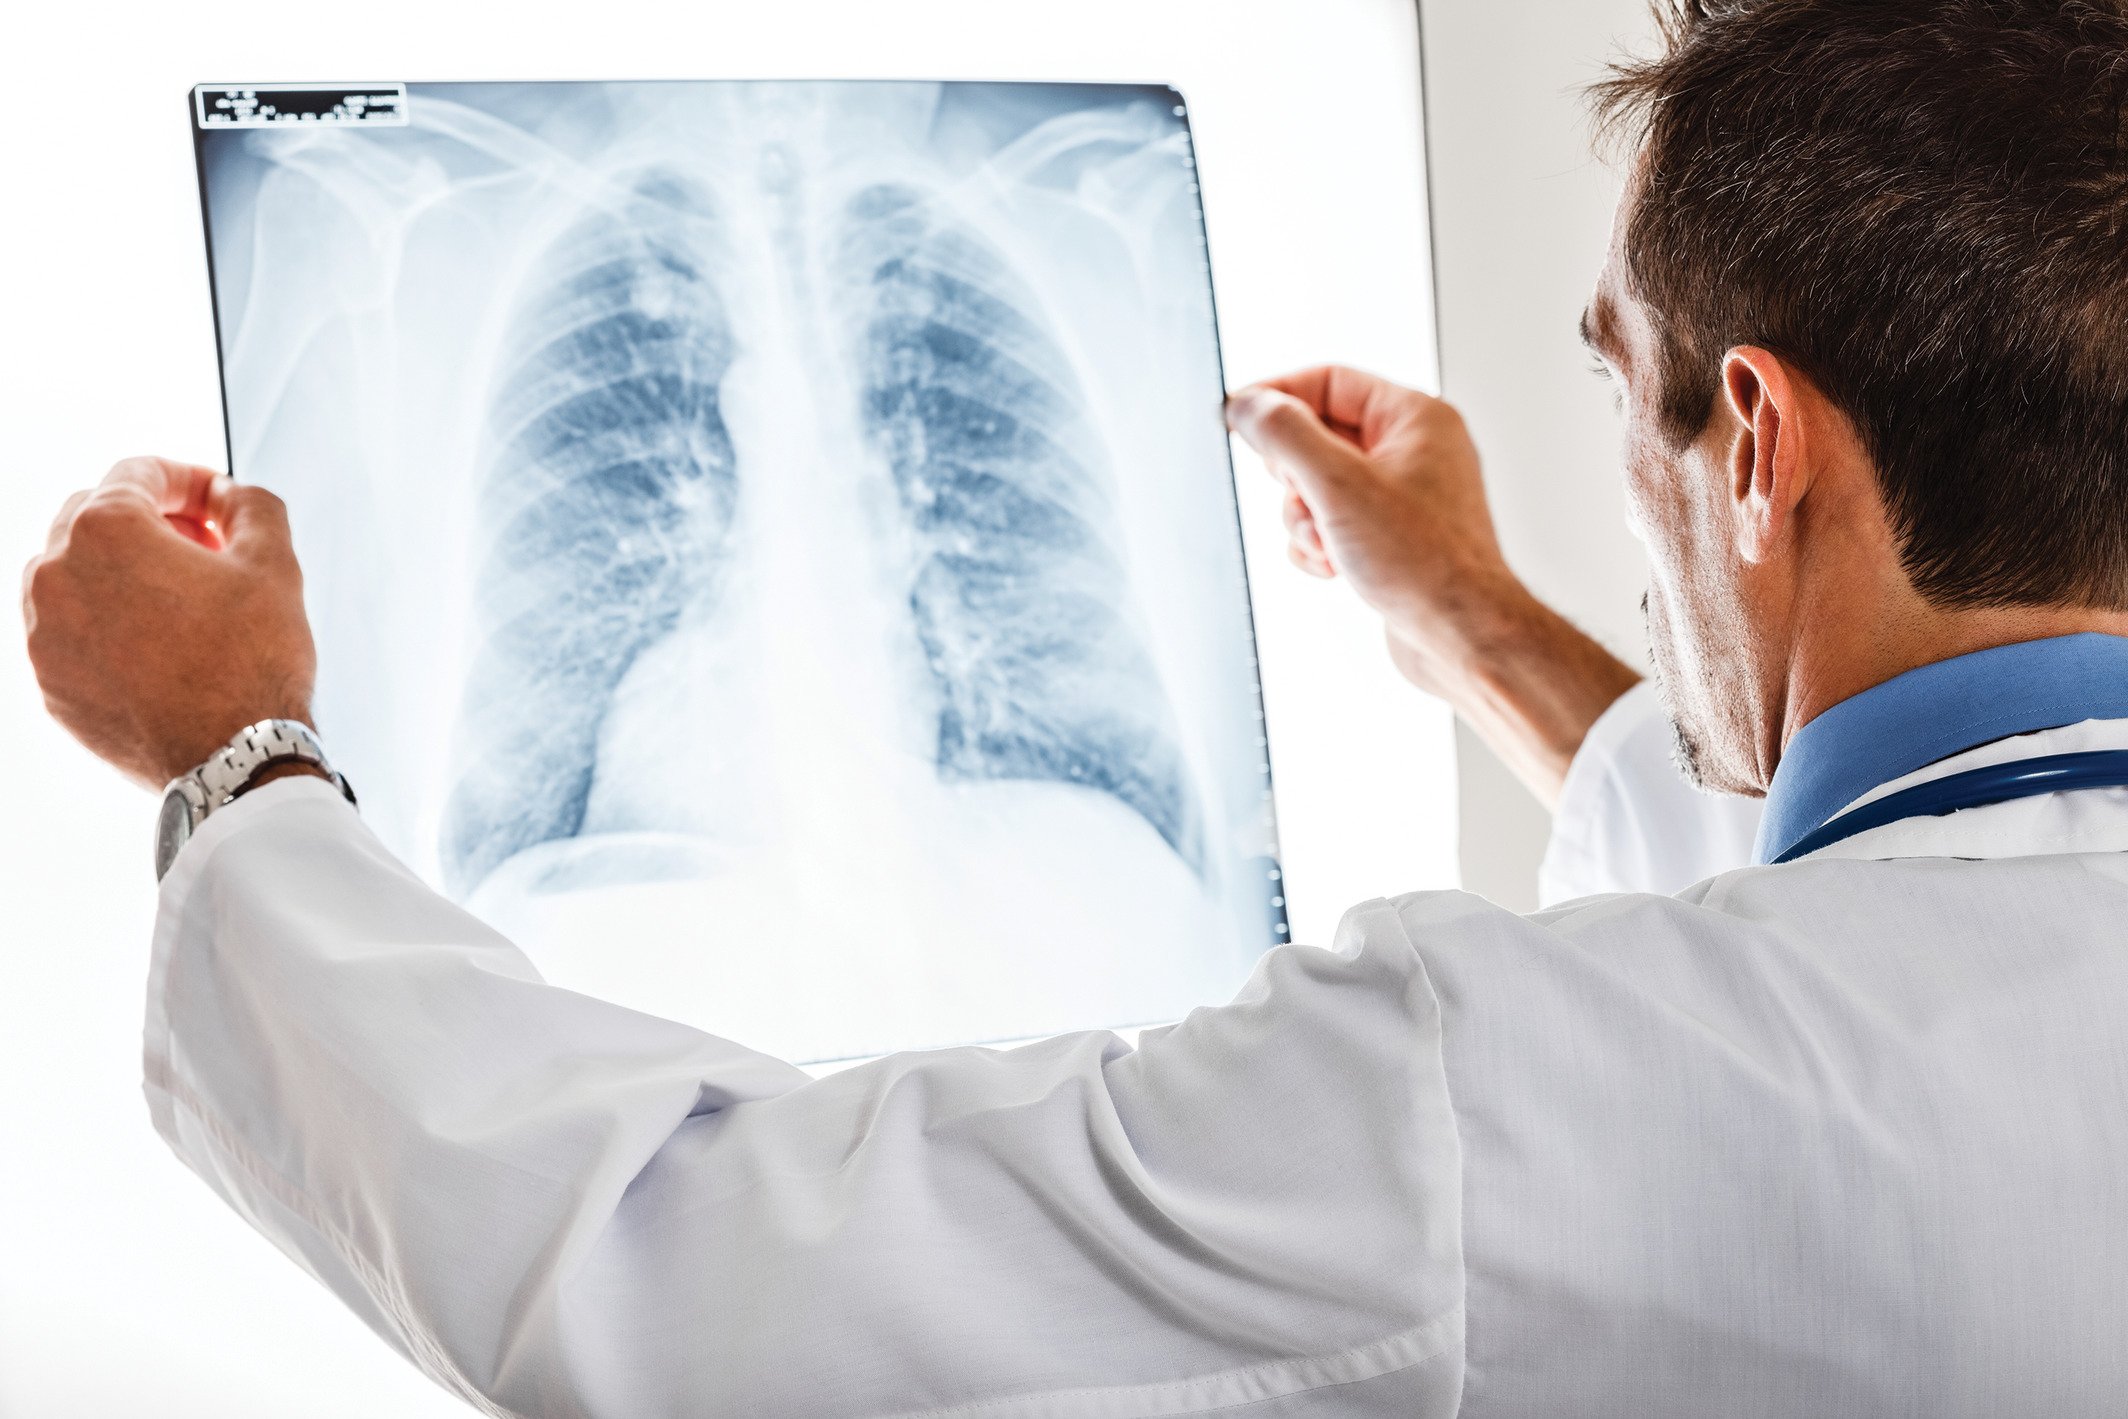   DIGITAL X-RAY   X-ray machines use electromagnetic radiation, passing these particles through the body to capture specialized images of harder bodily structures like bones.   Learn more  